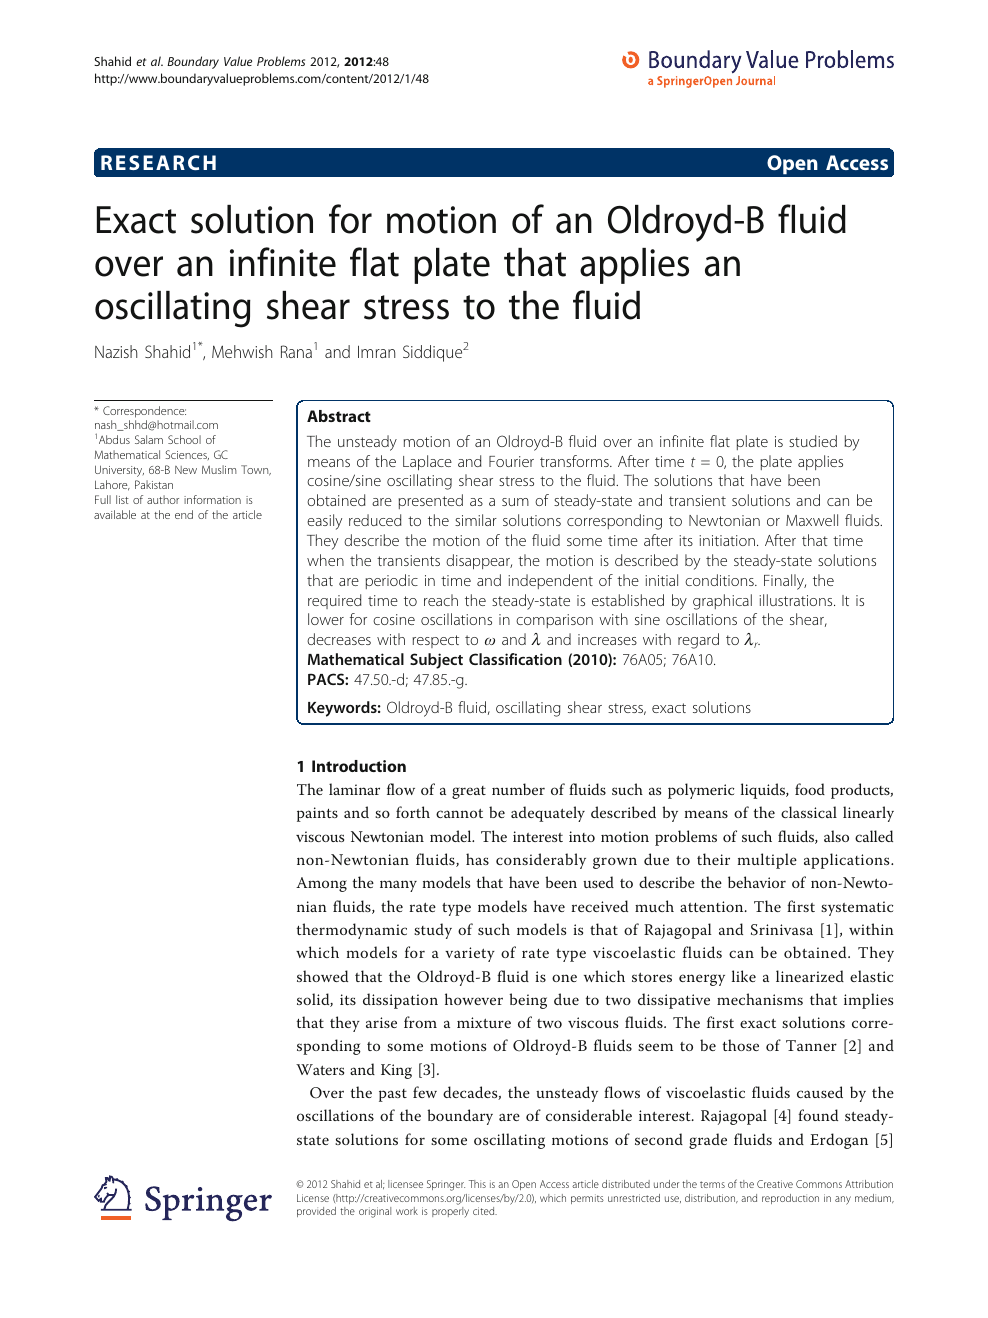 Exact Solution For Motion Of An Oldroyd B Fluid Over An Infinite Flat Plate That Applies An Oscillating Shear Stress To The Fluid Topic Of Research Paper In Mathematics Download Scholarly Article